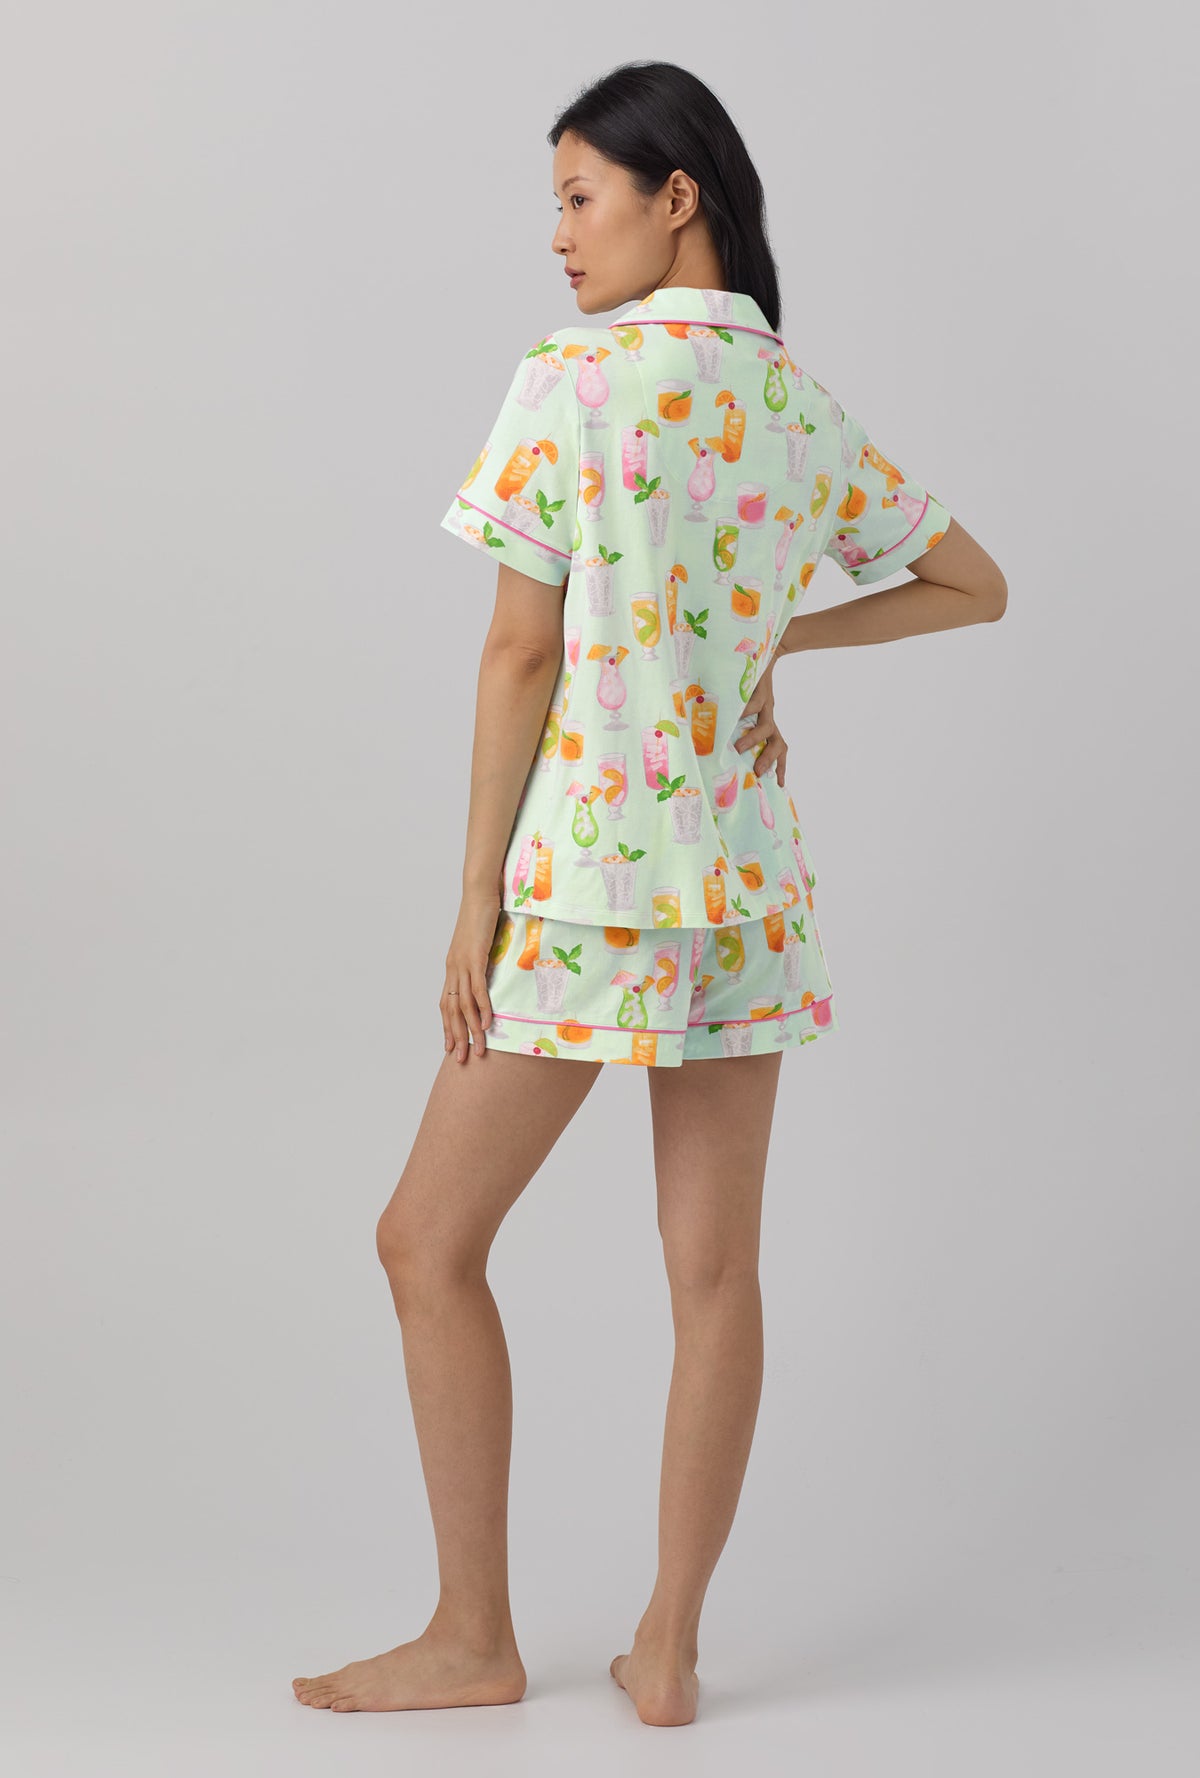 A lady wearing Short Sleeve Classic Shorty Stretch Jersey PJ Set with summer sips print